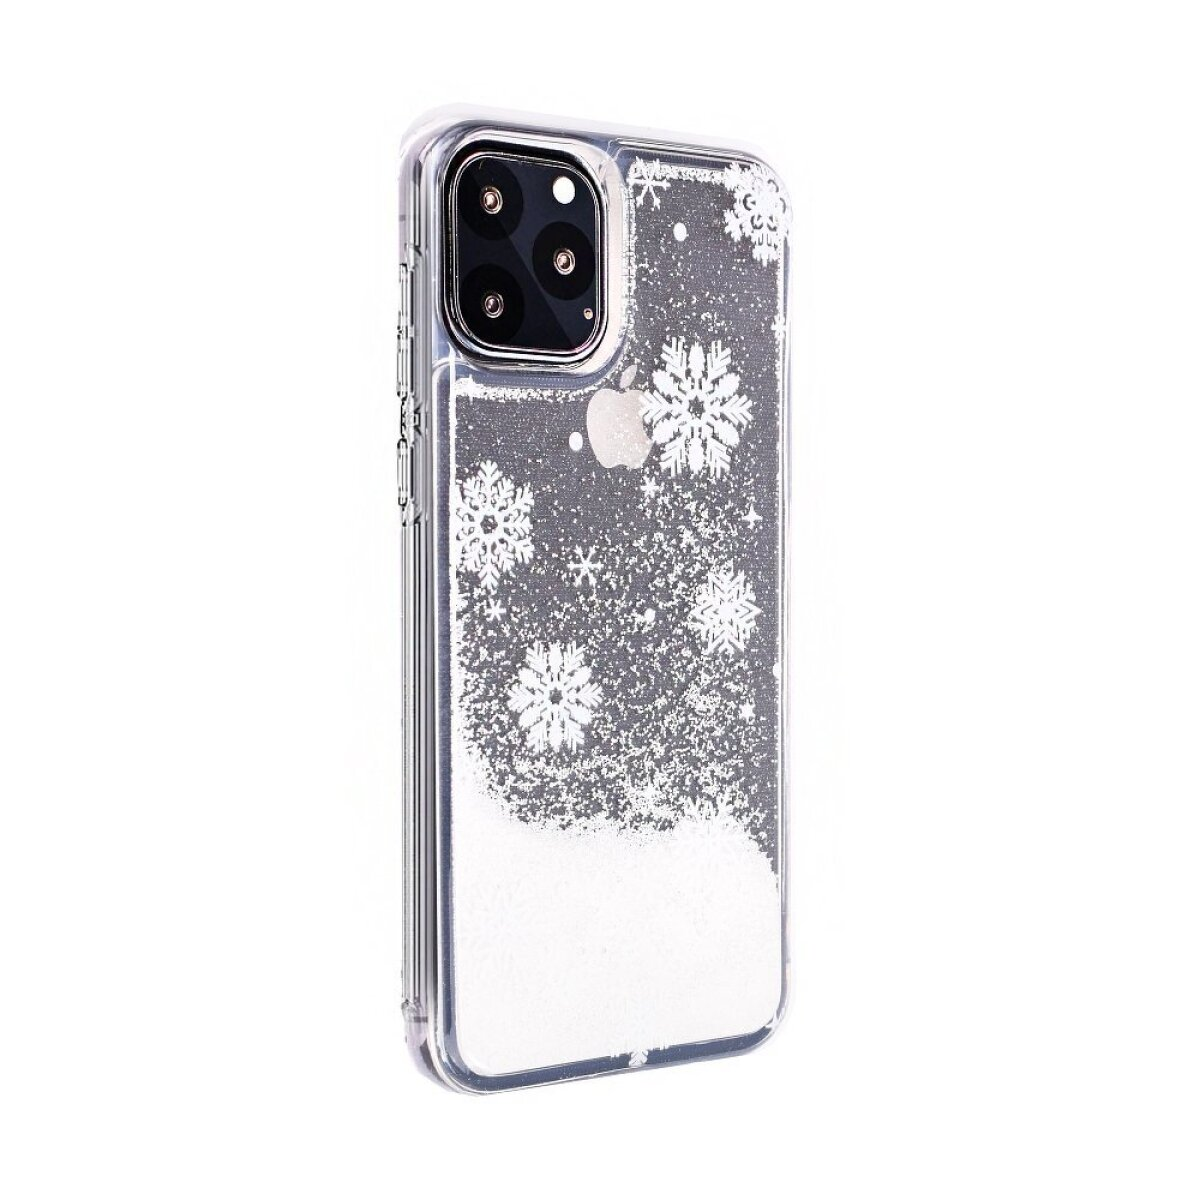 FORCELL Winter Max, Full Cover, Apple, Pro Pro iPhone Max Not snowflakes, 11 iPhone 11 available